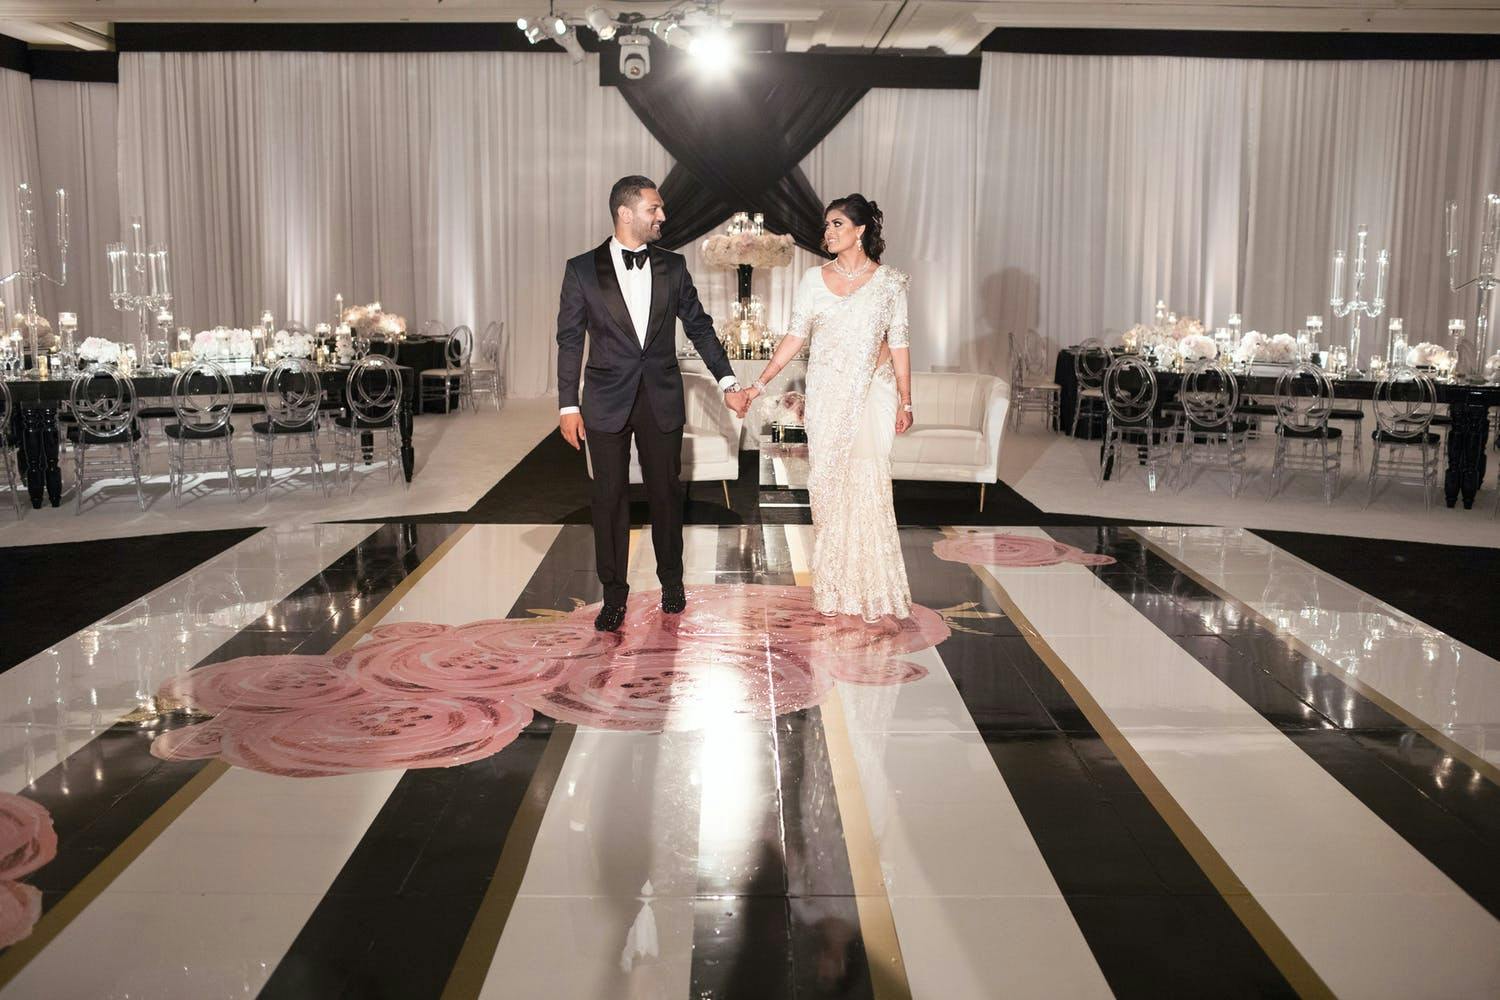 Couple Poses on Black and White Dance Floor With Pink Roses | PartySlate